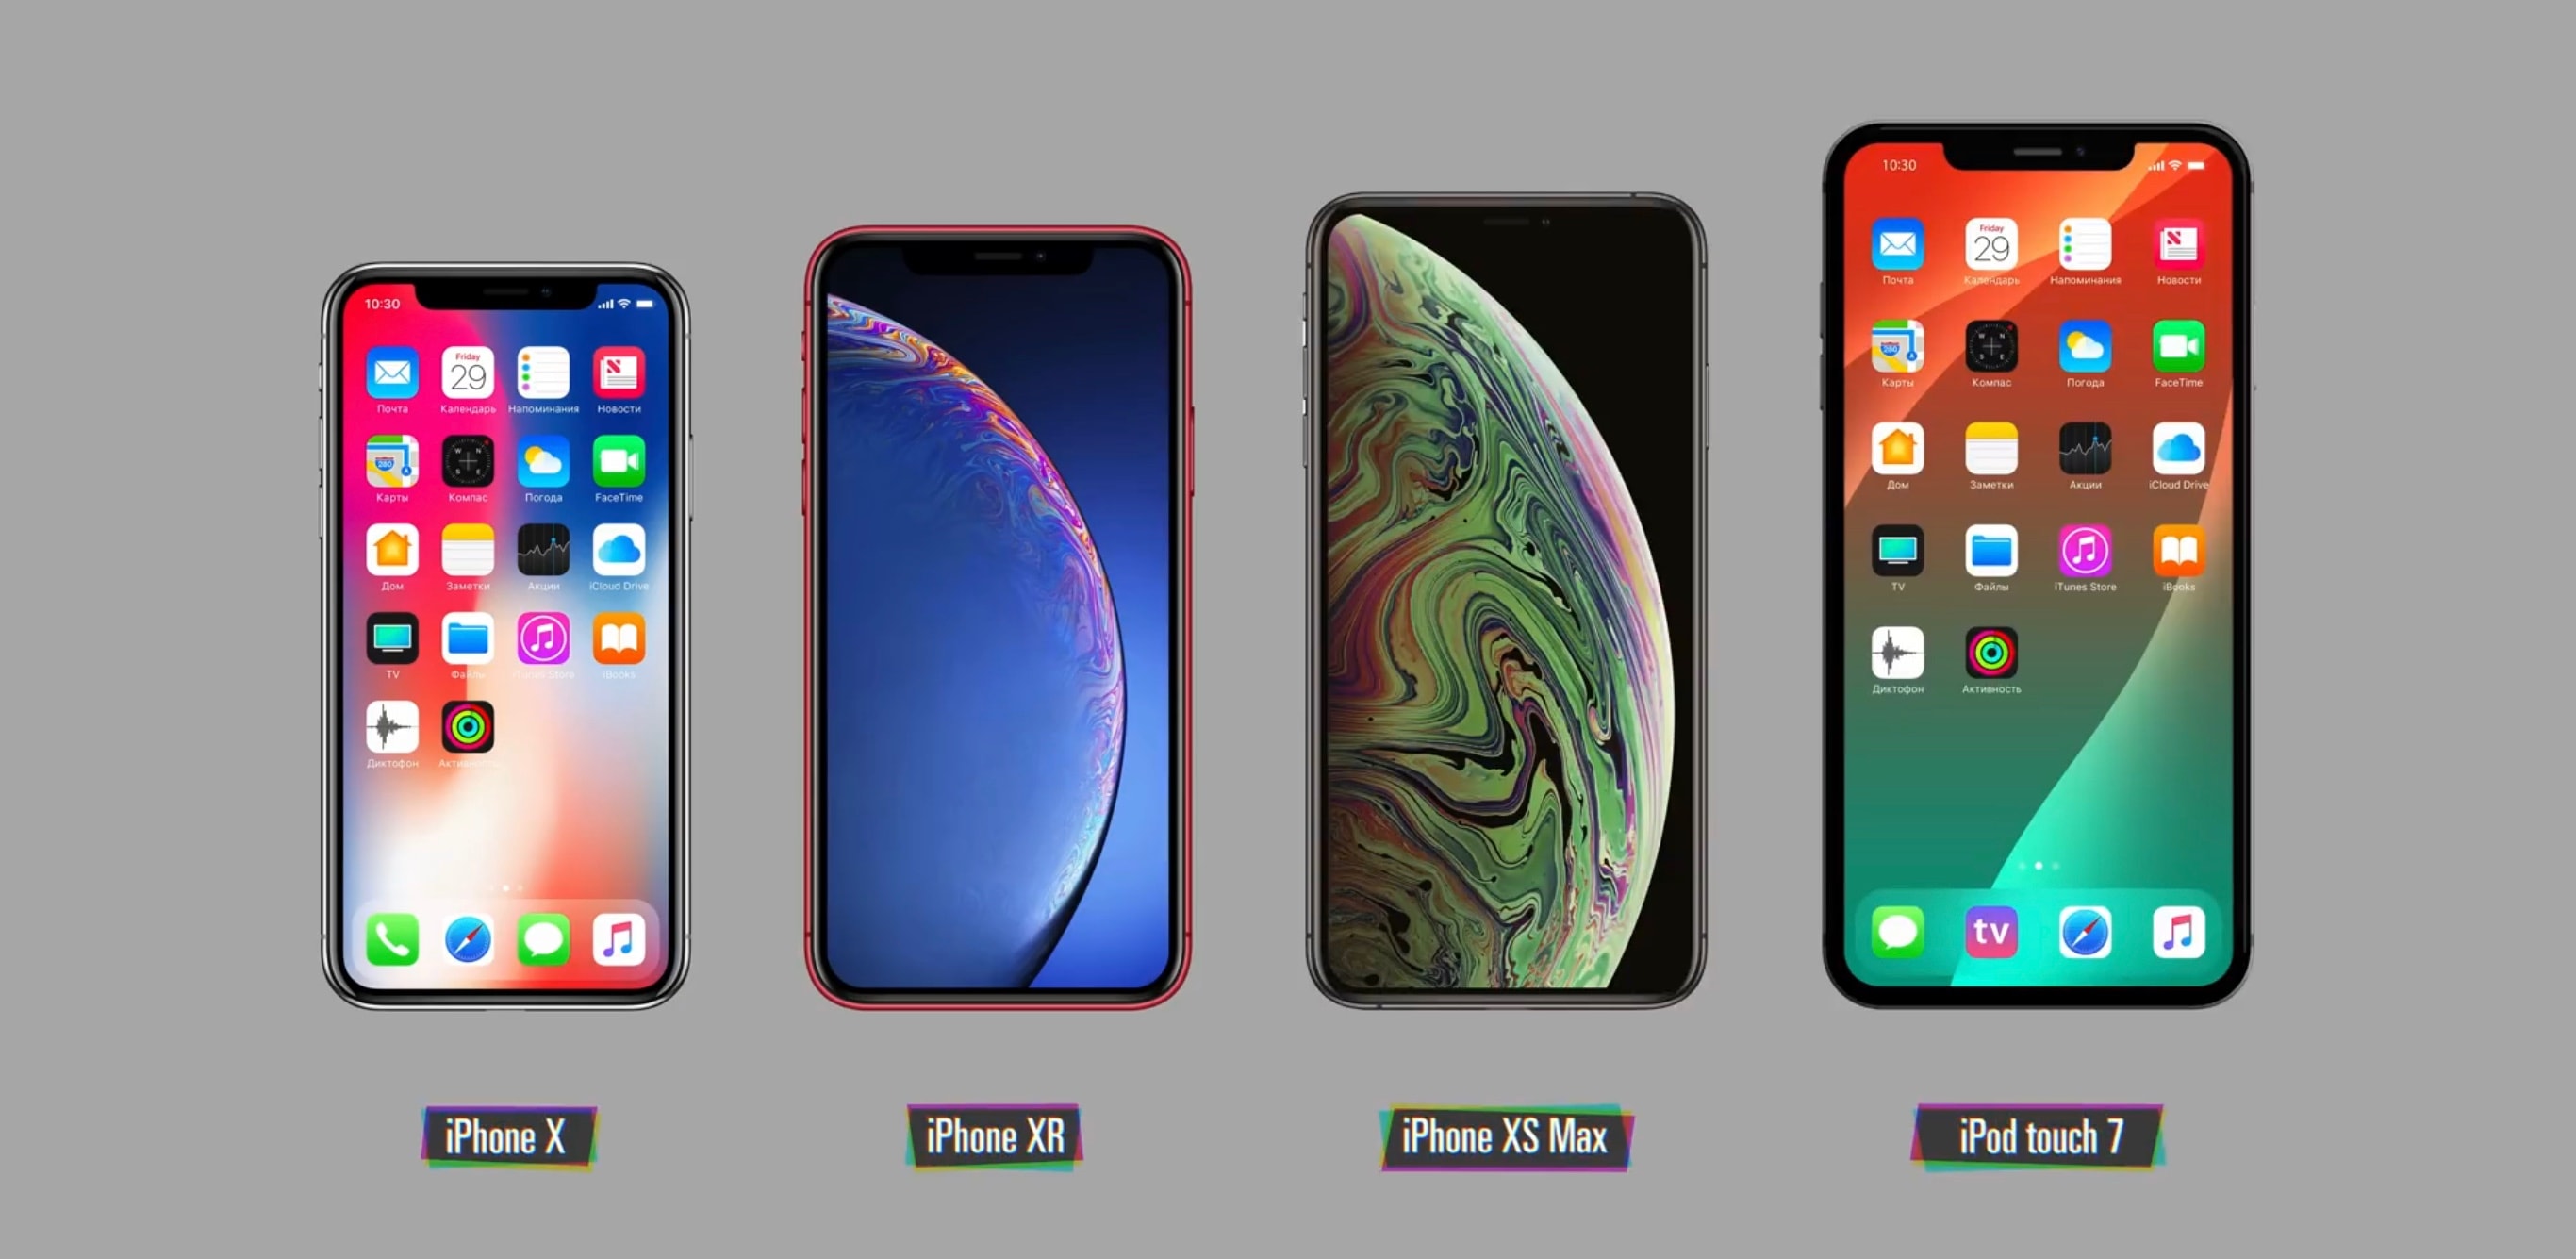 This concept iPod touch 7 would be even bigger than the iPhone XS Max.